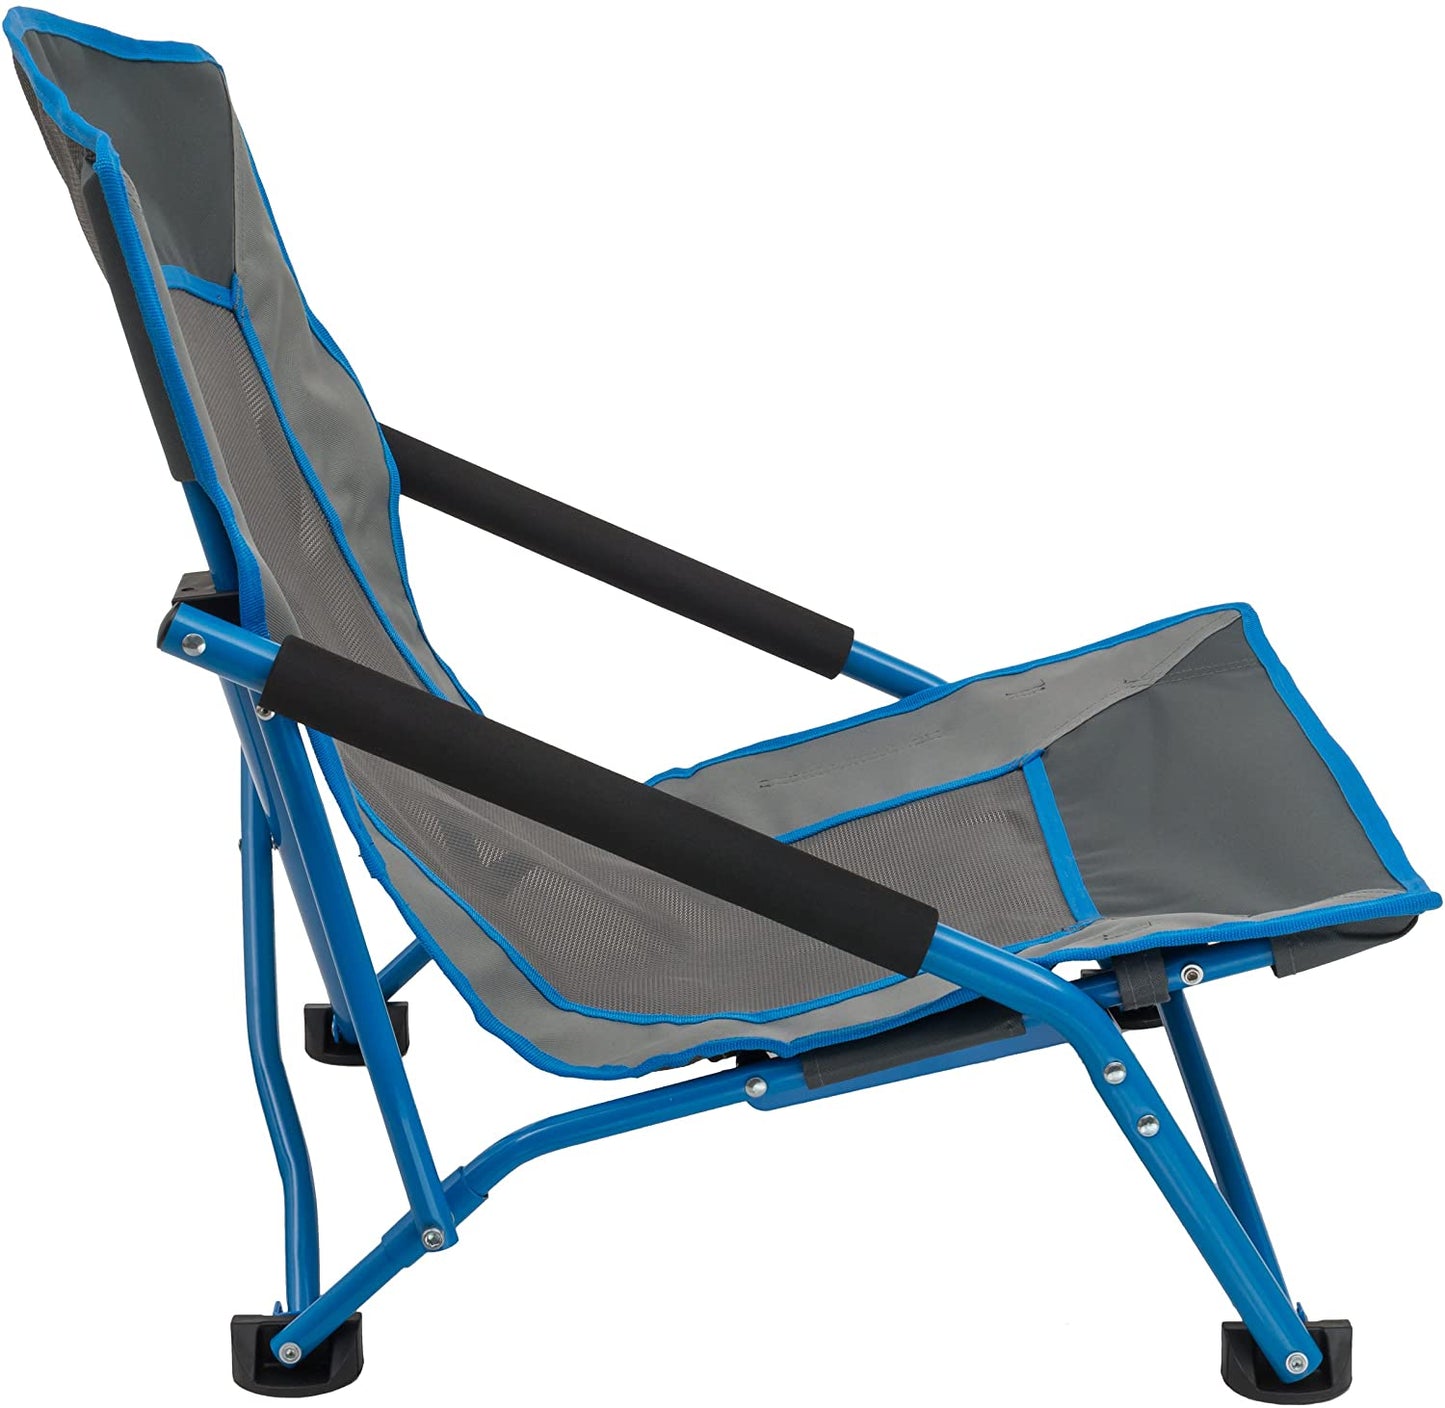 ALPS Mountaineering Rendezvous Folding Camp Chair - AL8013941